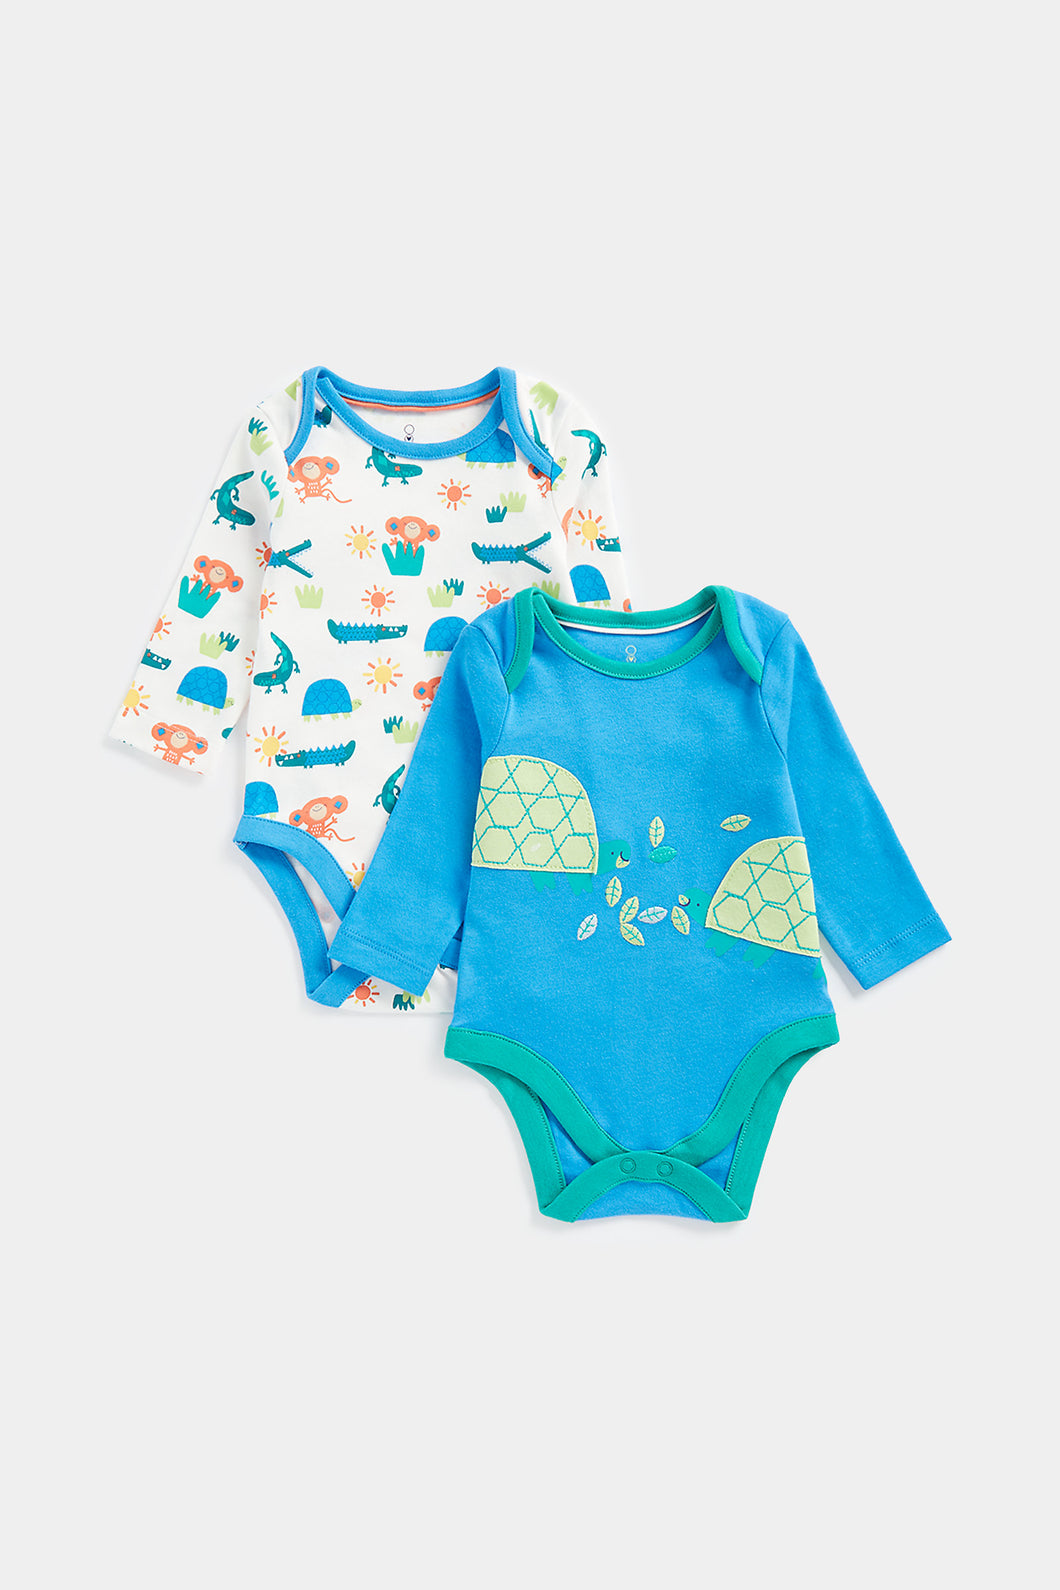 Mothercare Fun Bodysuits - 2 Pack